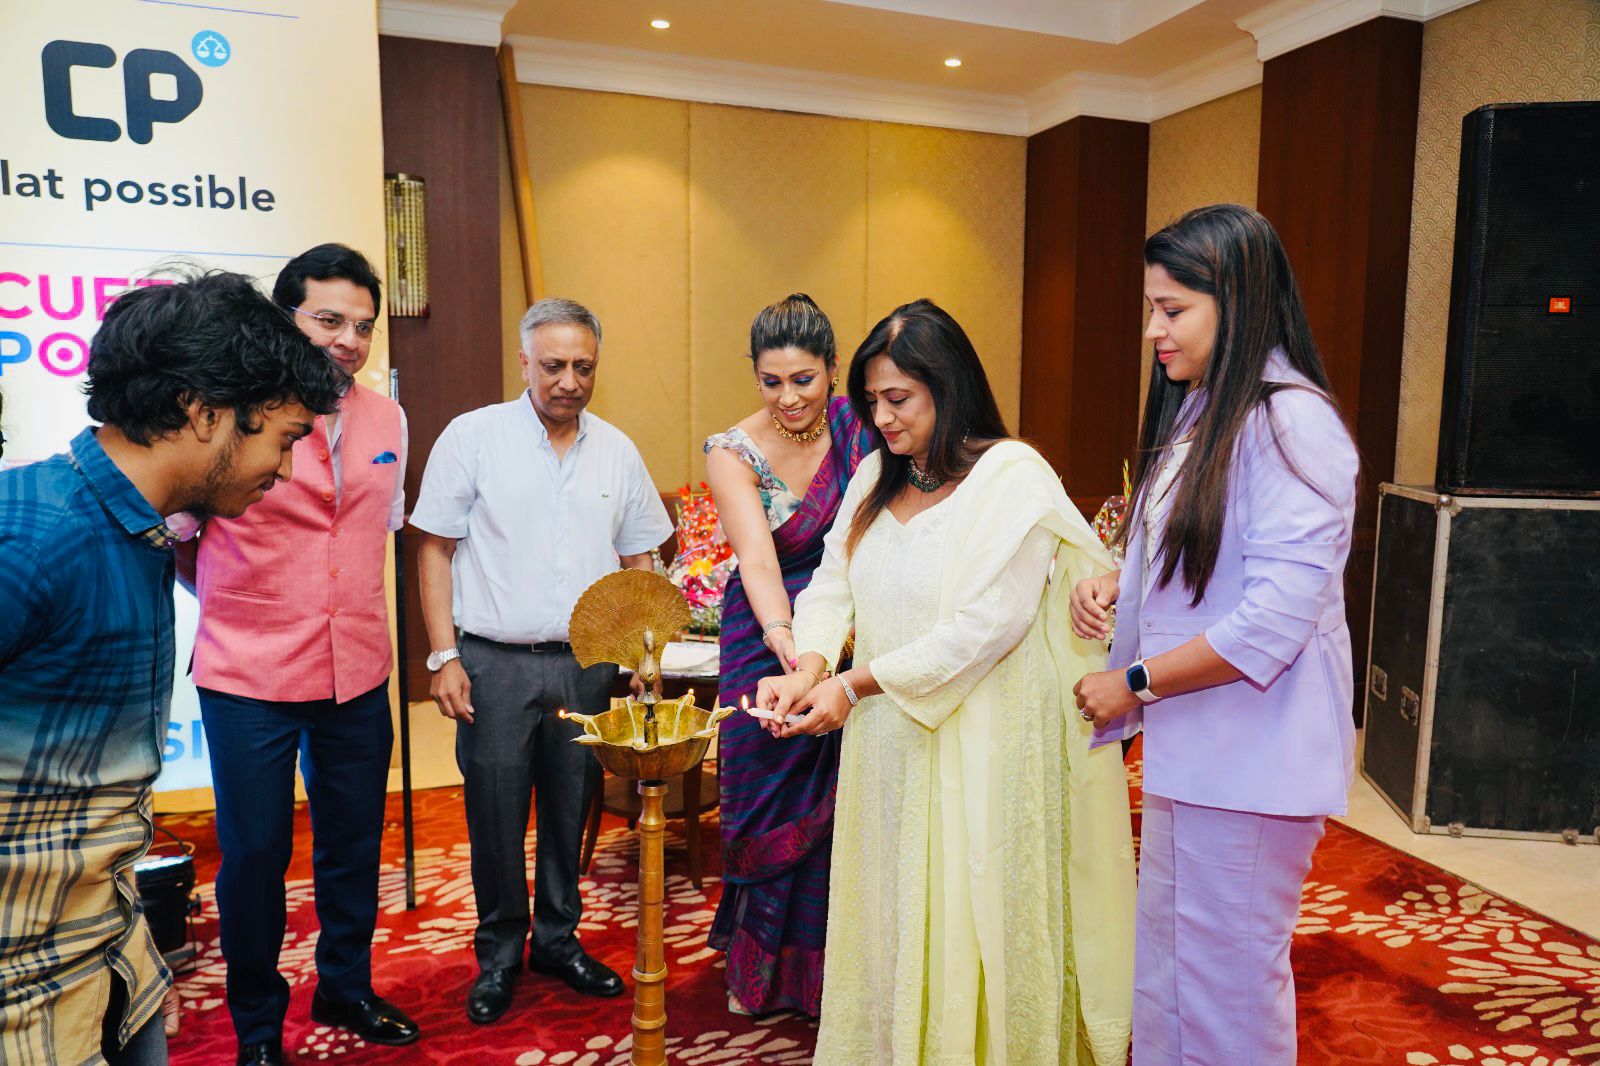 INAUGURATION CEREMONY CLAT POSSIBLE 2023 Our Dear Respected Principal ma’am Dr Manjula Goswami was invited as the honorary Chief guest in the inauguration ceremony of Clat Possible 2023 at ITC Fortune. She addressed the august gathering and motivated the 